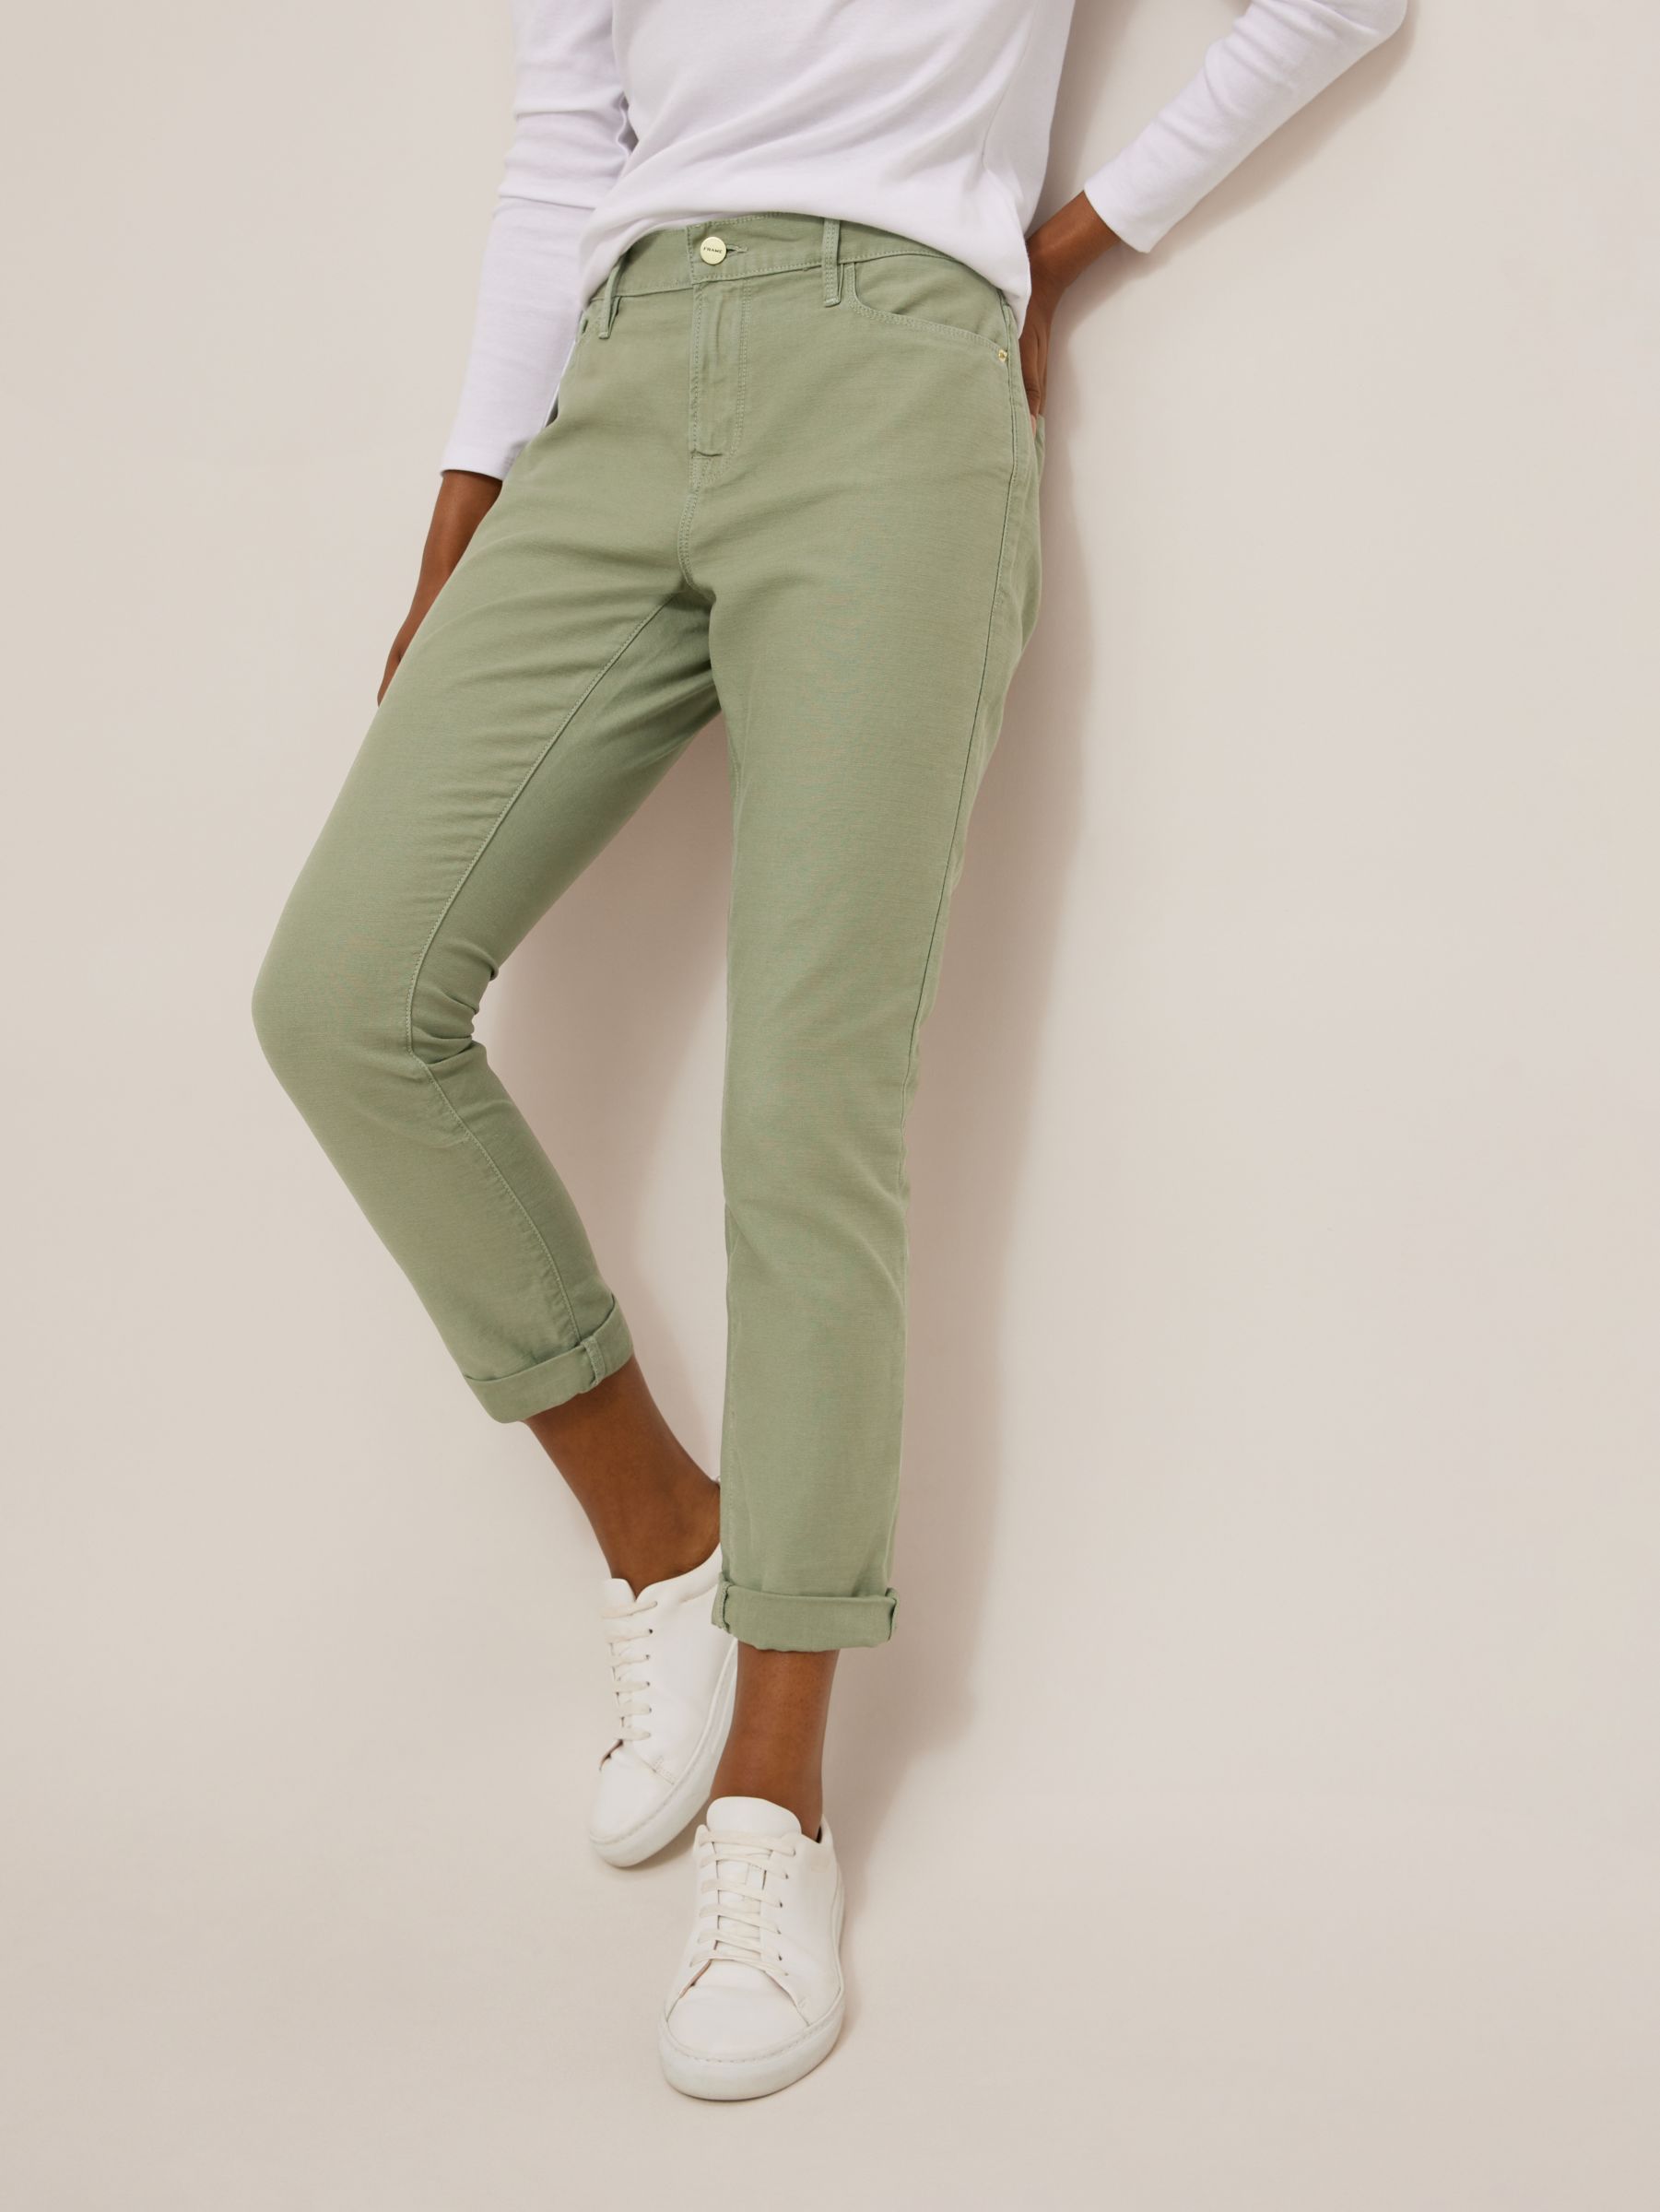 FRAME Le Garcon Skinny Jeans, Washed Military